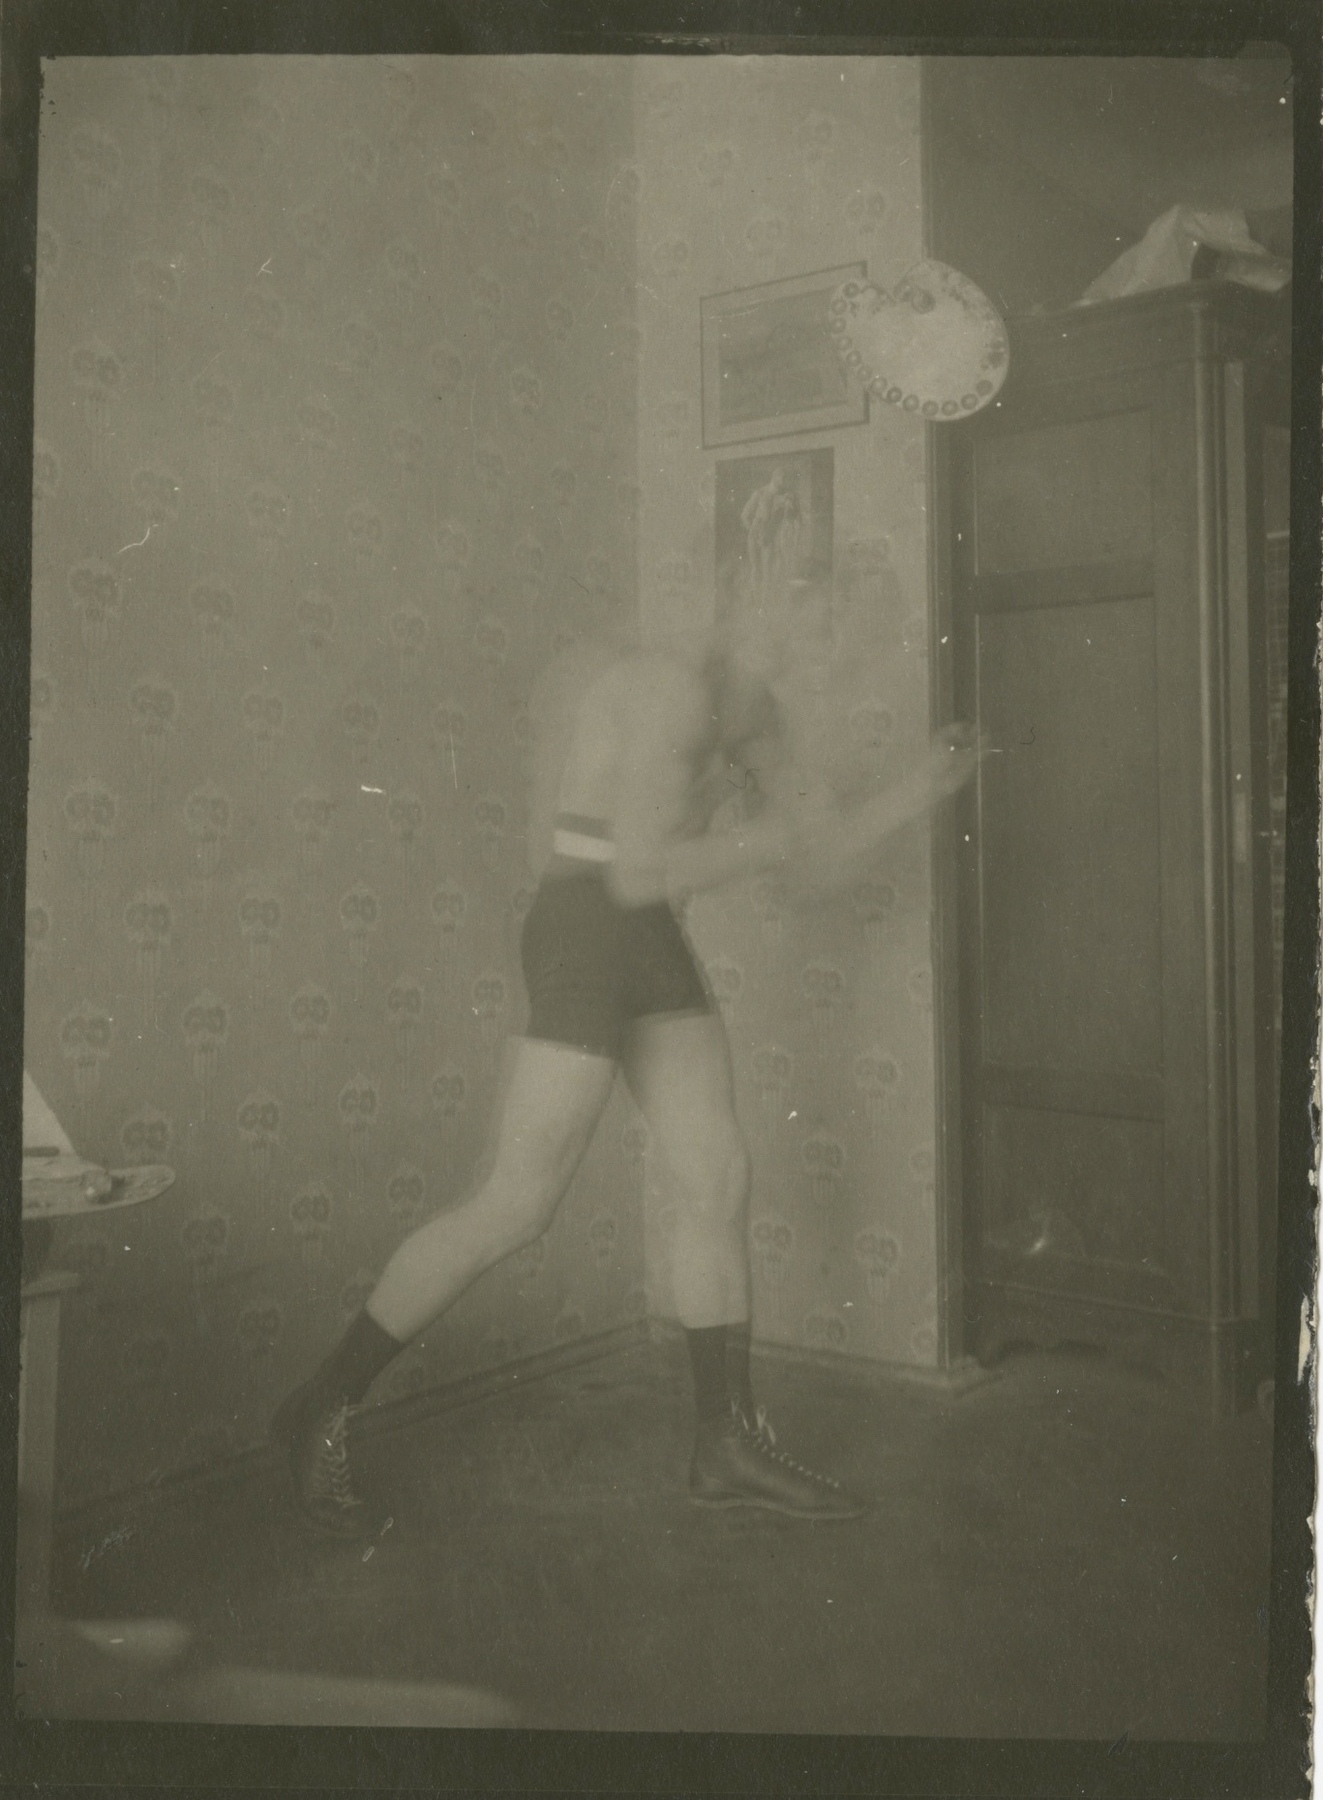 Standing Nude, Female Portrait, Seated Nude and Self-Portrait Boxing